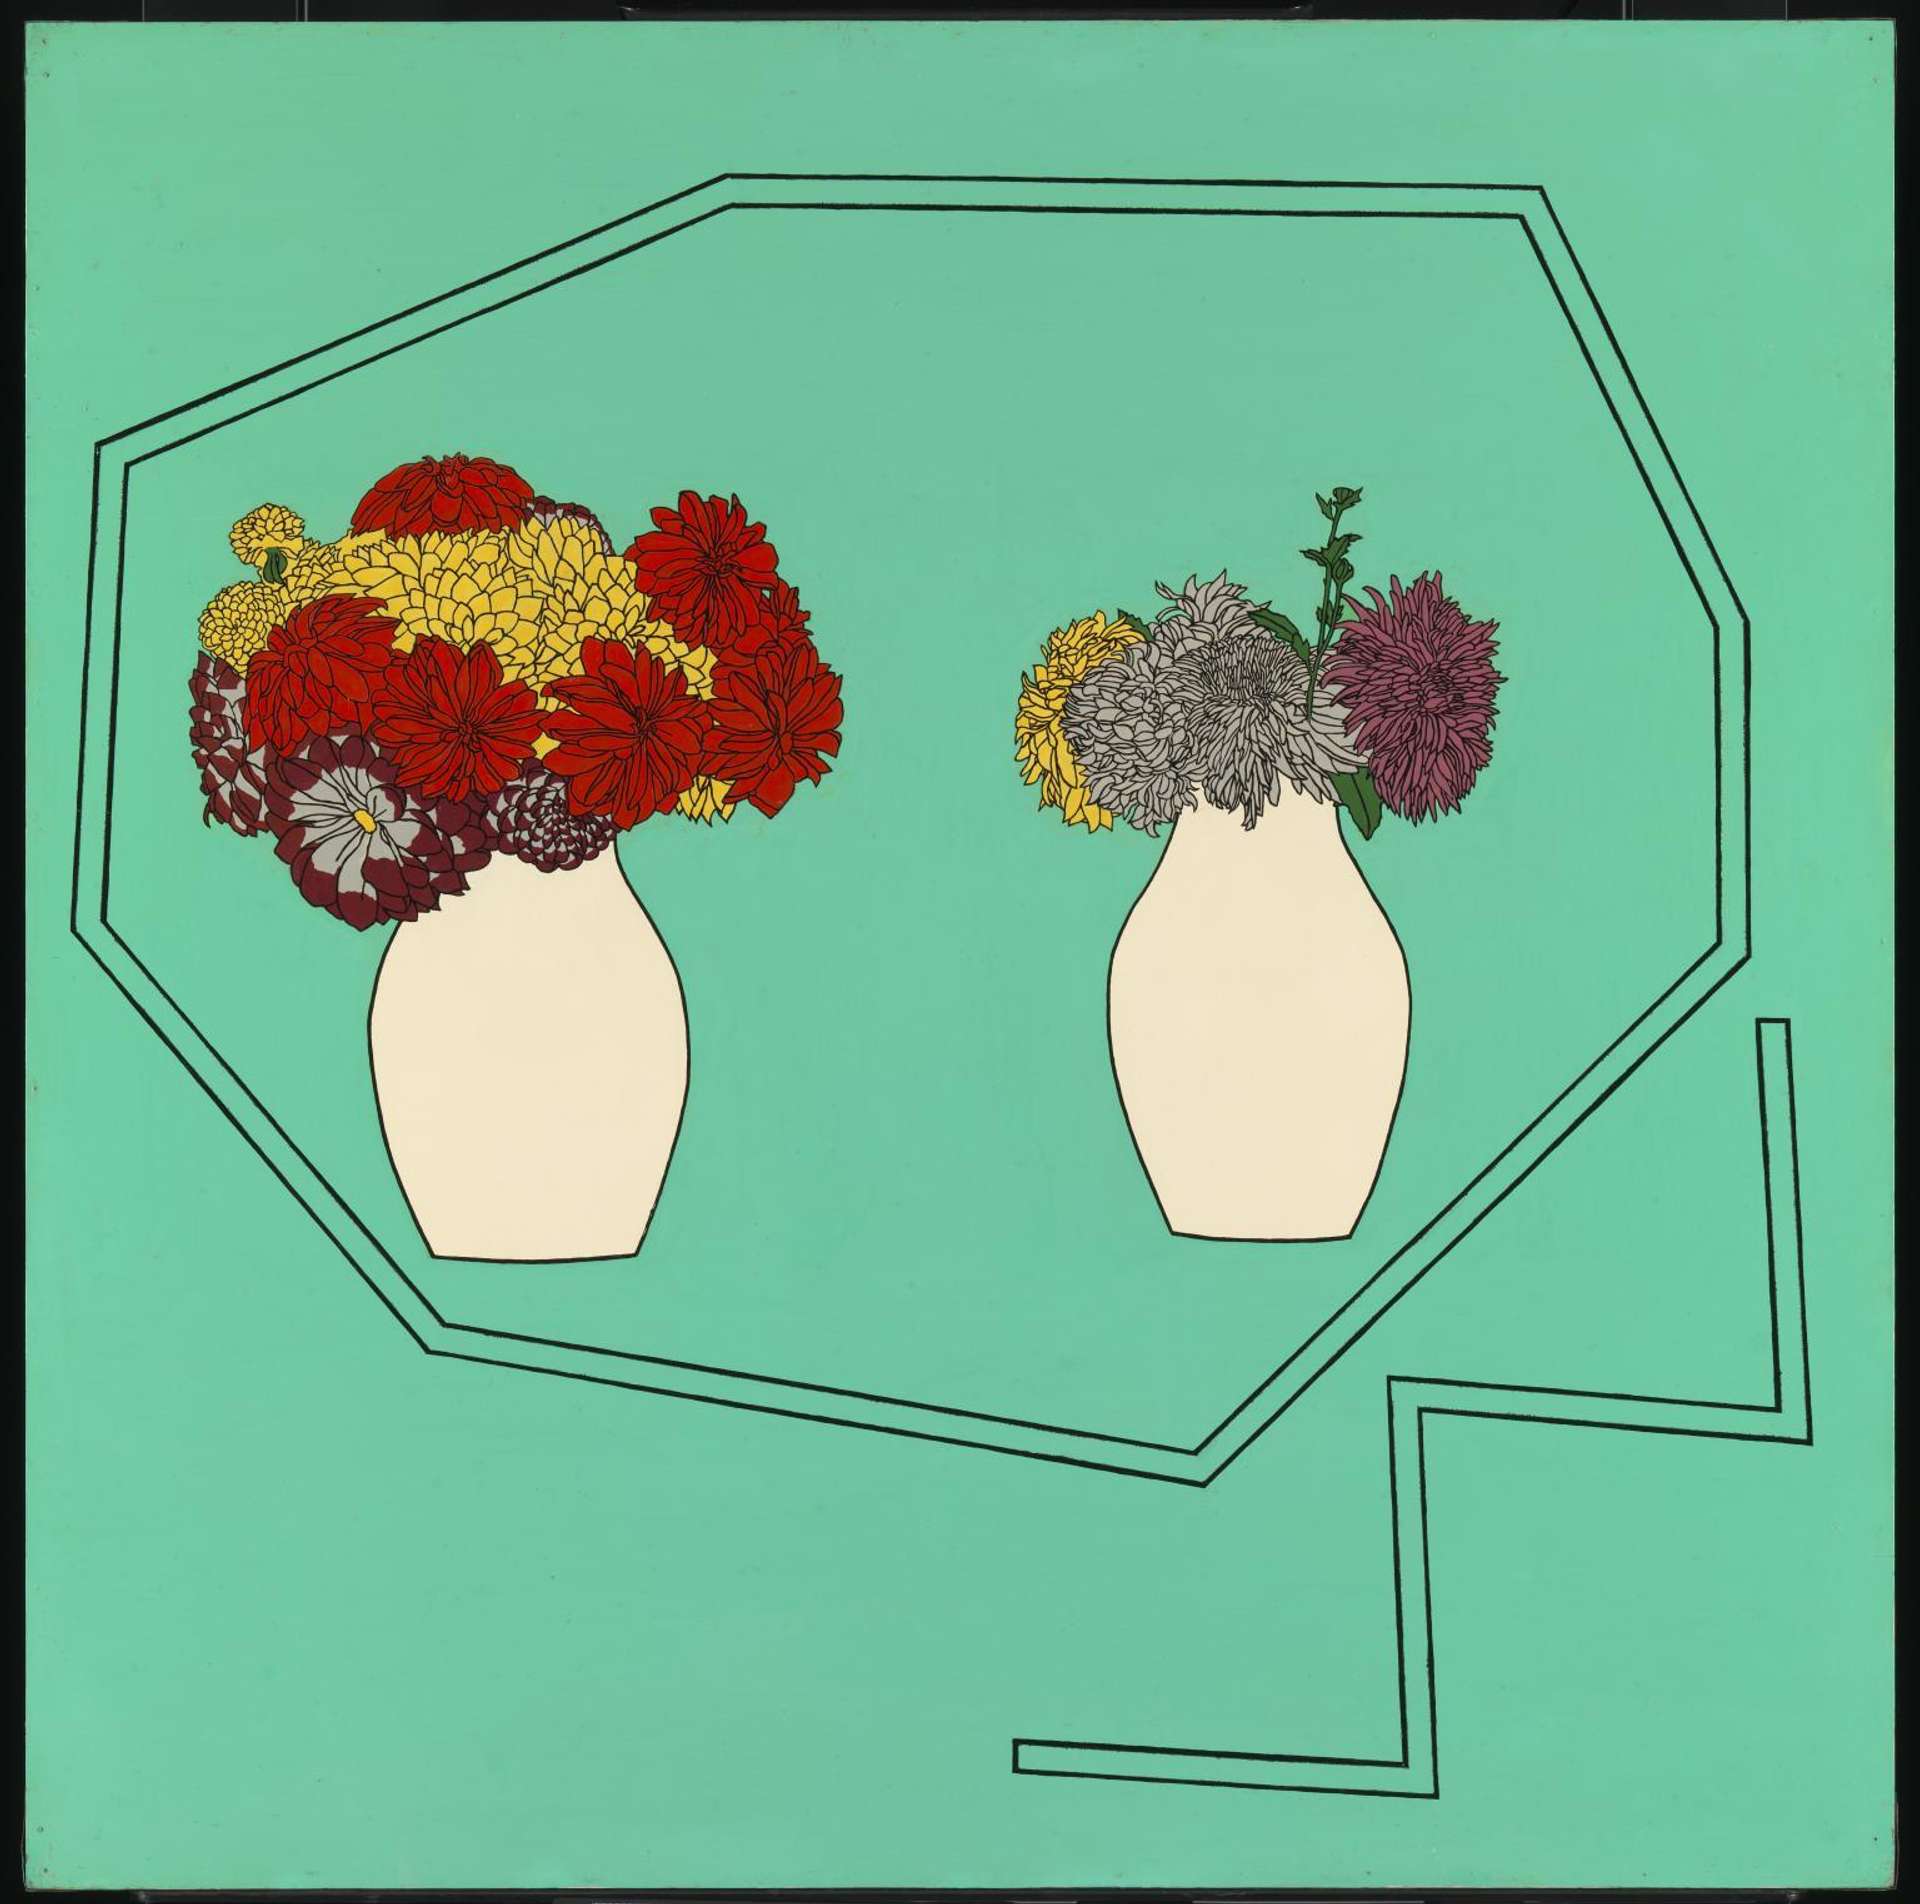 A printed image by the artist Patrick Caulfield, which depicts two white vases with colourful flowers against a teal background. Flat geometric shapes suggest a table for thebases and a chair on the side. 